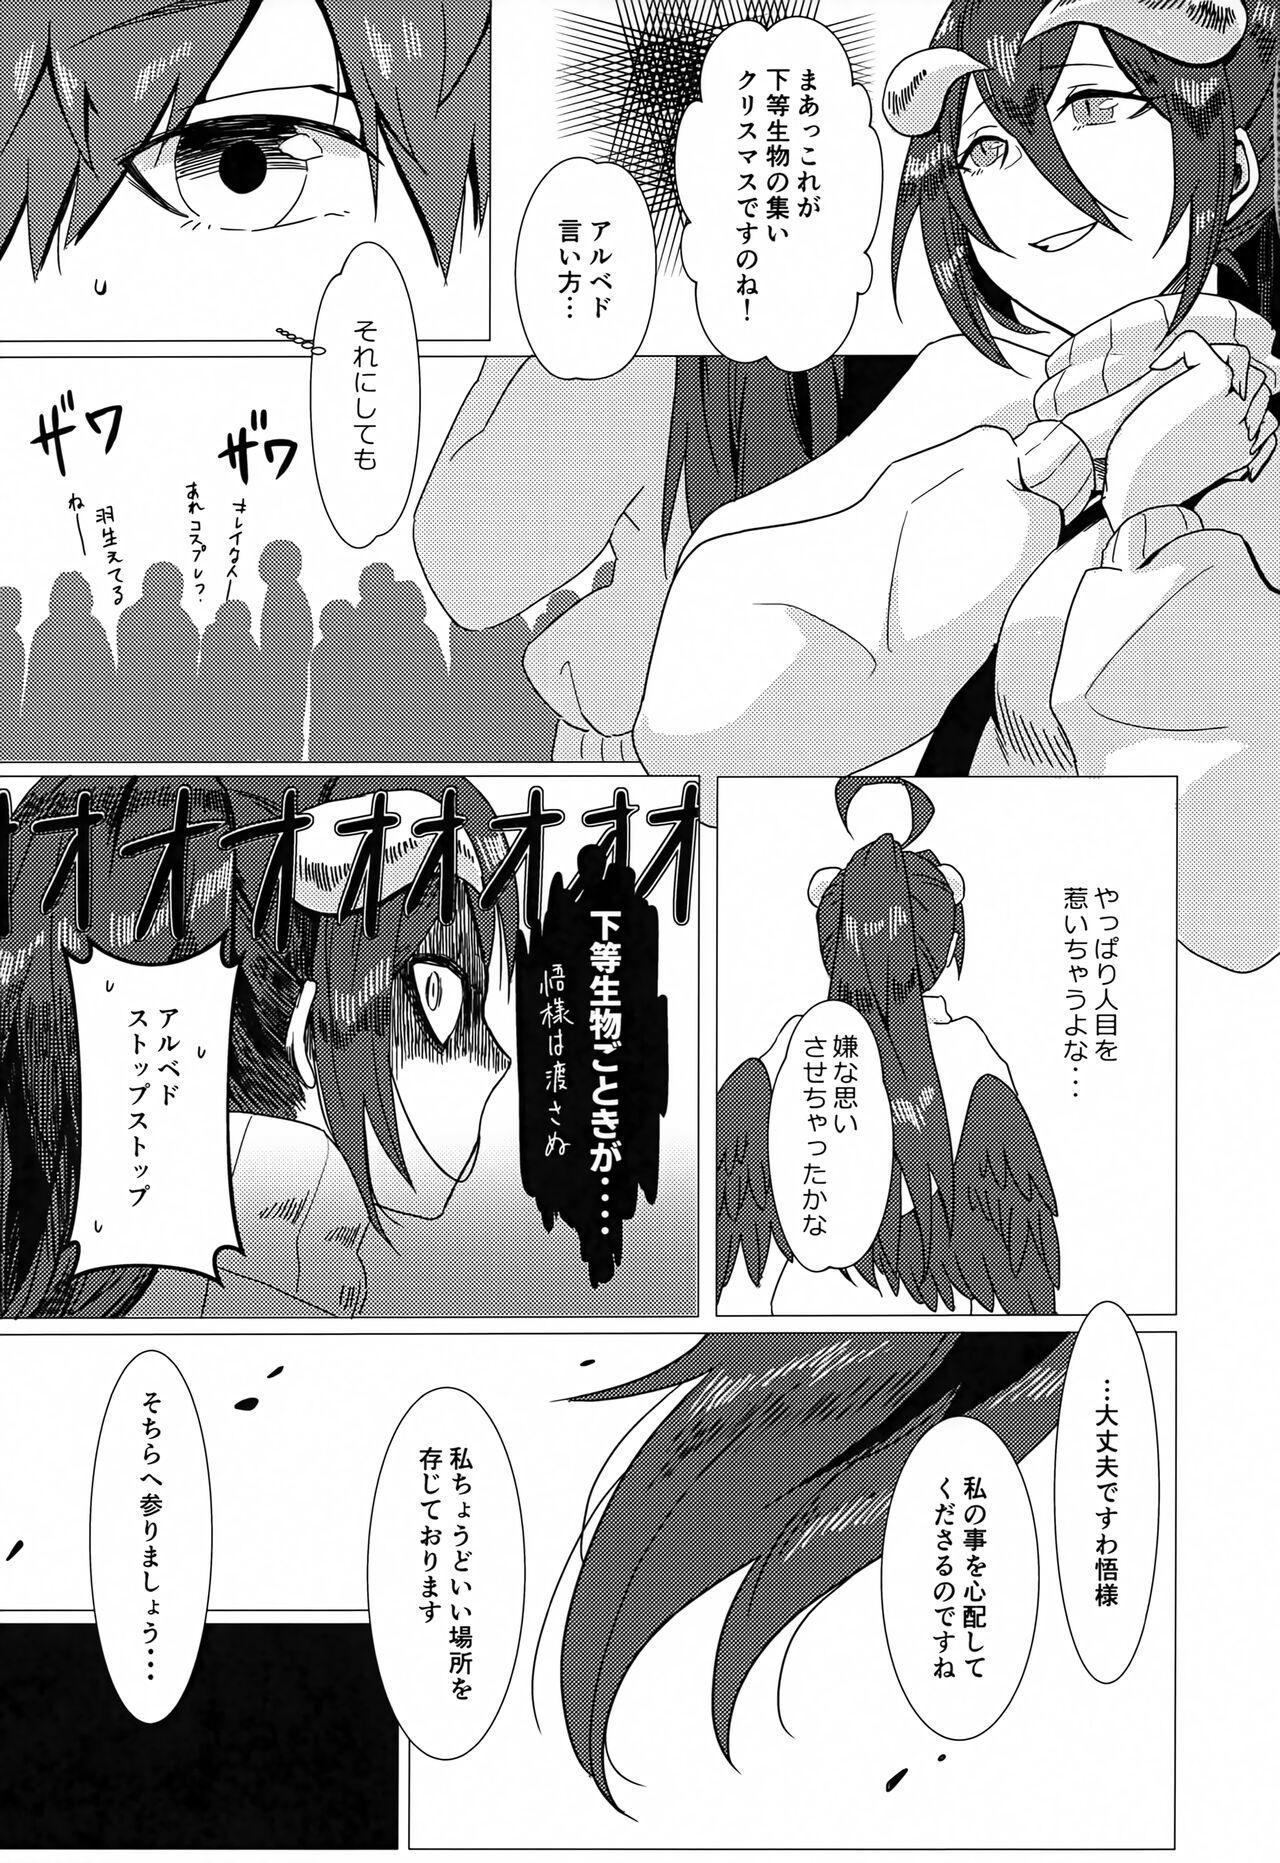 Strap On Albedo-san to! 2 - Overlord Long Hair - Page 6